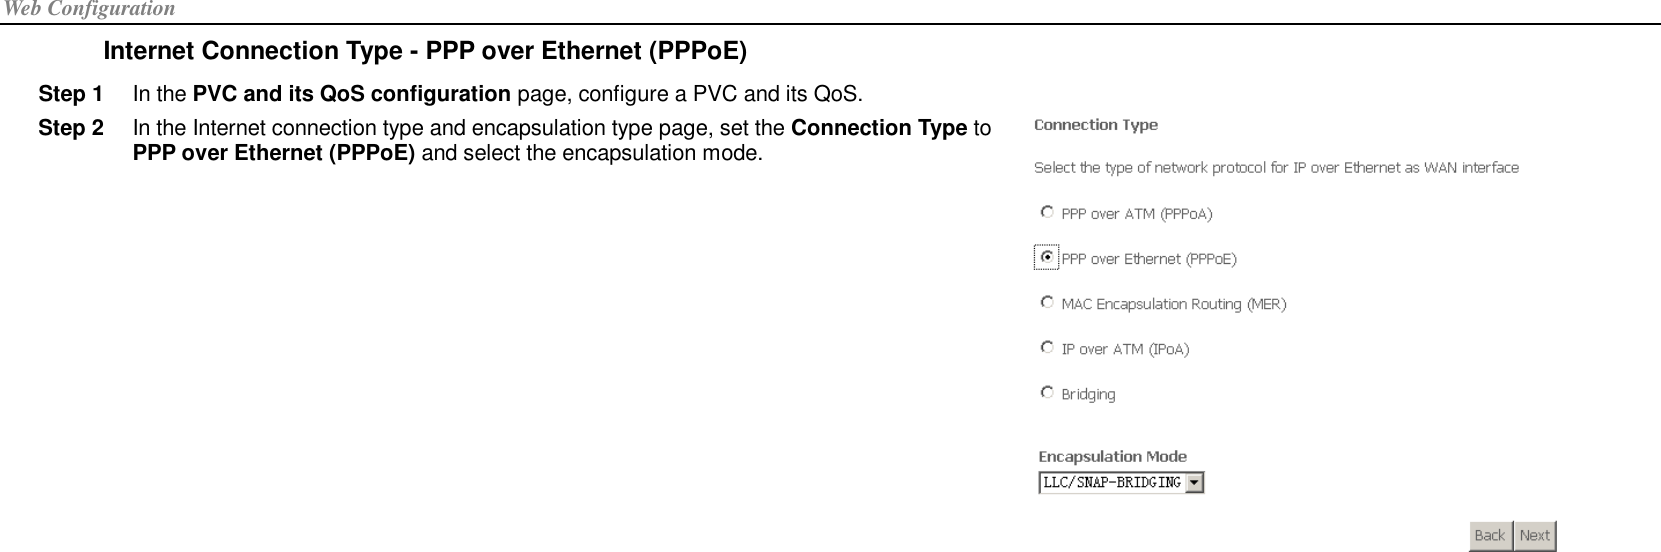 Web Configuration Internet Connection Type - PPP over Ethernet (PPPoE) Step 1  In the PVC and its QoS configuration page, configure a PVC and its QoS.   Step 2  In the Internet connection type and encapsulation type page, set the Connection Type to PPP over Ethernet (PPPoE) and select the encapsulation mode.  